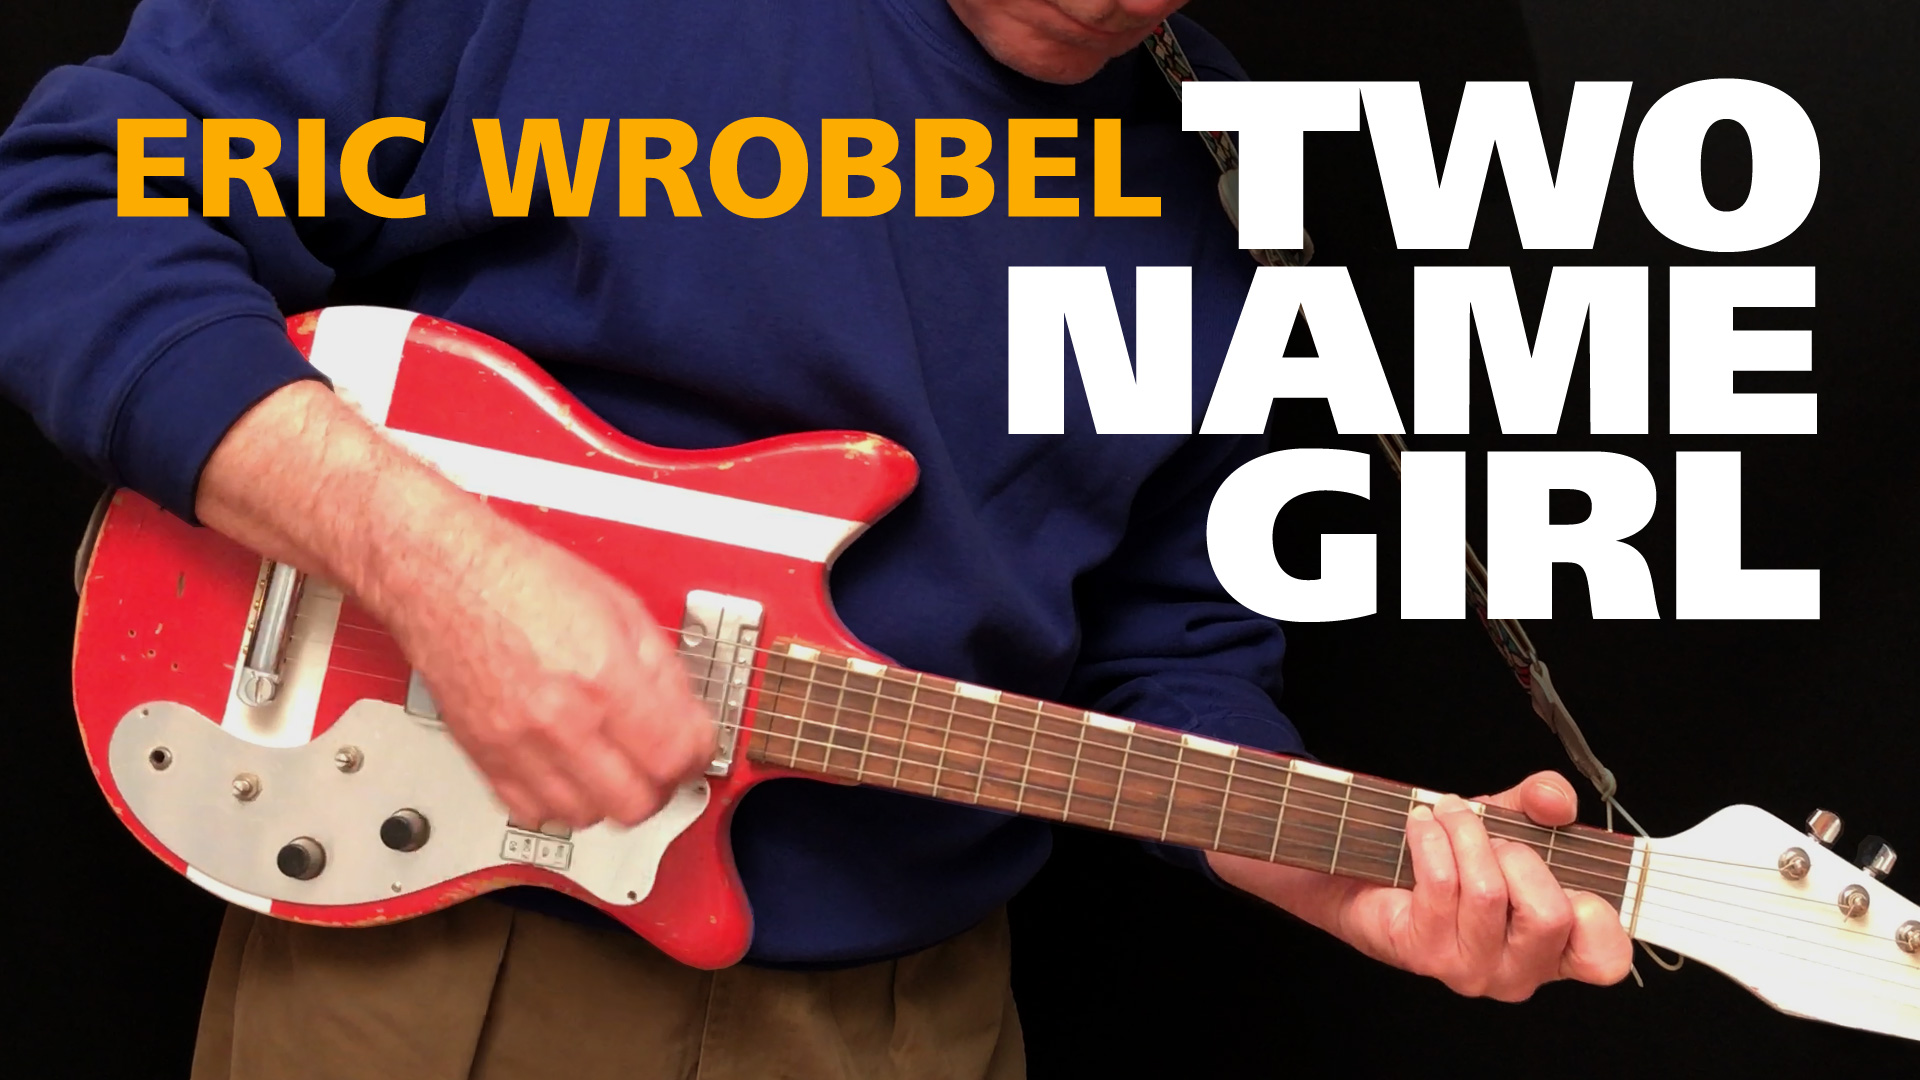 Two Name Girl by Eric Wrobbel